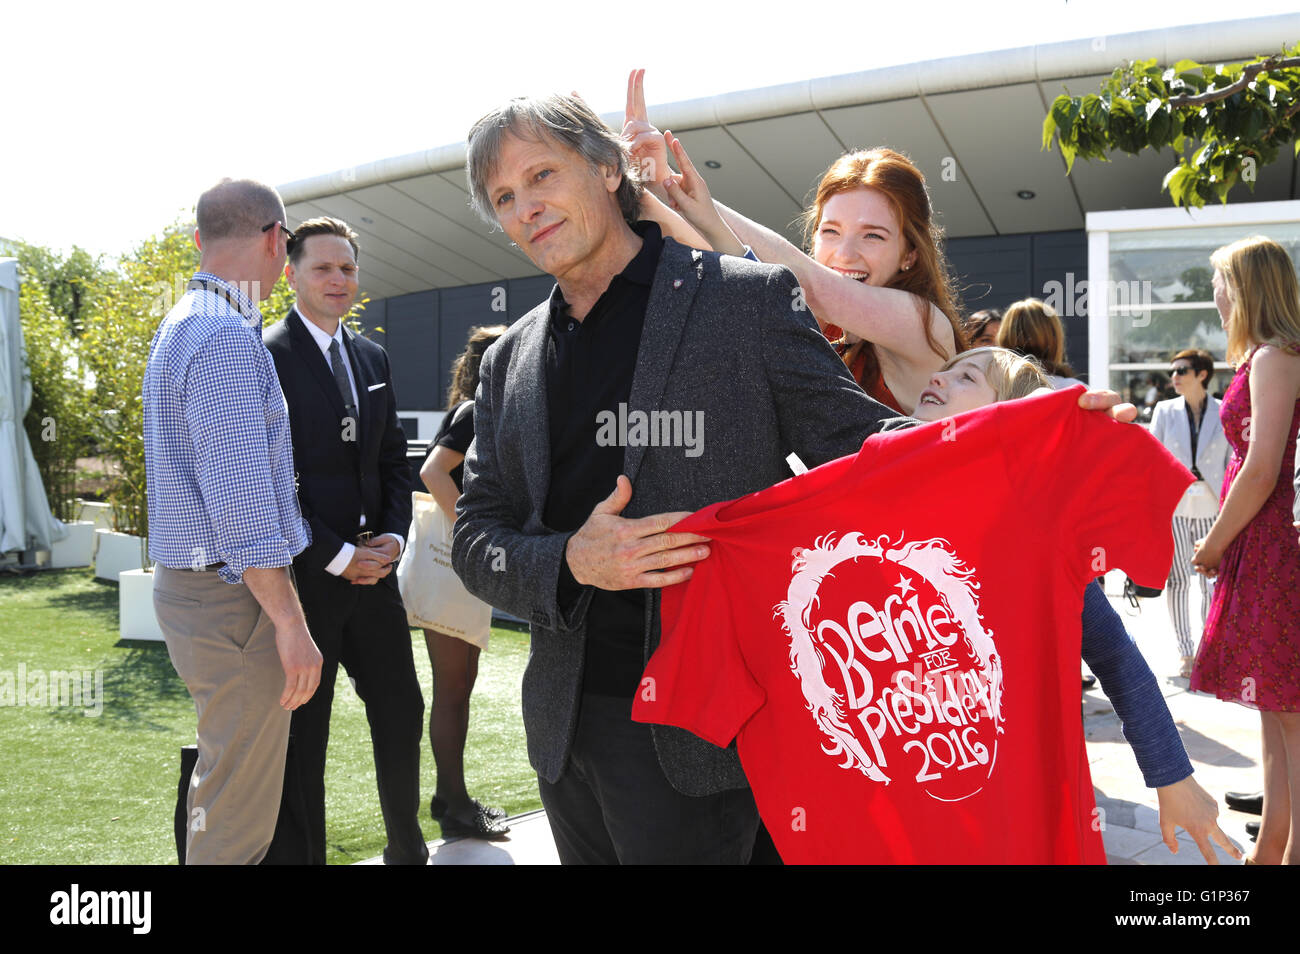 Viggo Mortensen and Annalise Basso at the 'Captain Fantastic' photocall during the 69th Cannes Film Festival at the Palais des Festivals on May 17, 2016 | usage worldwide/picture alliance Stock Photo